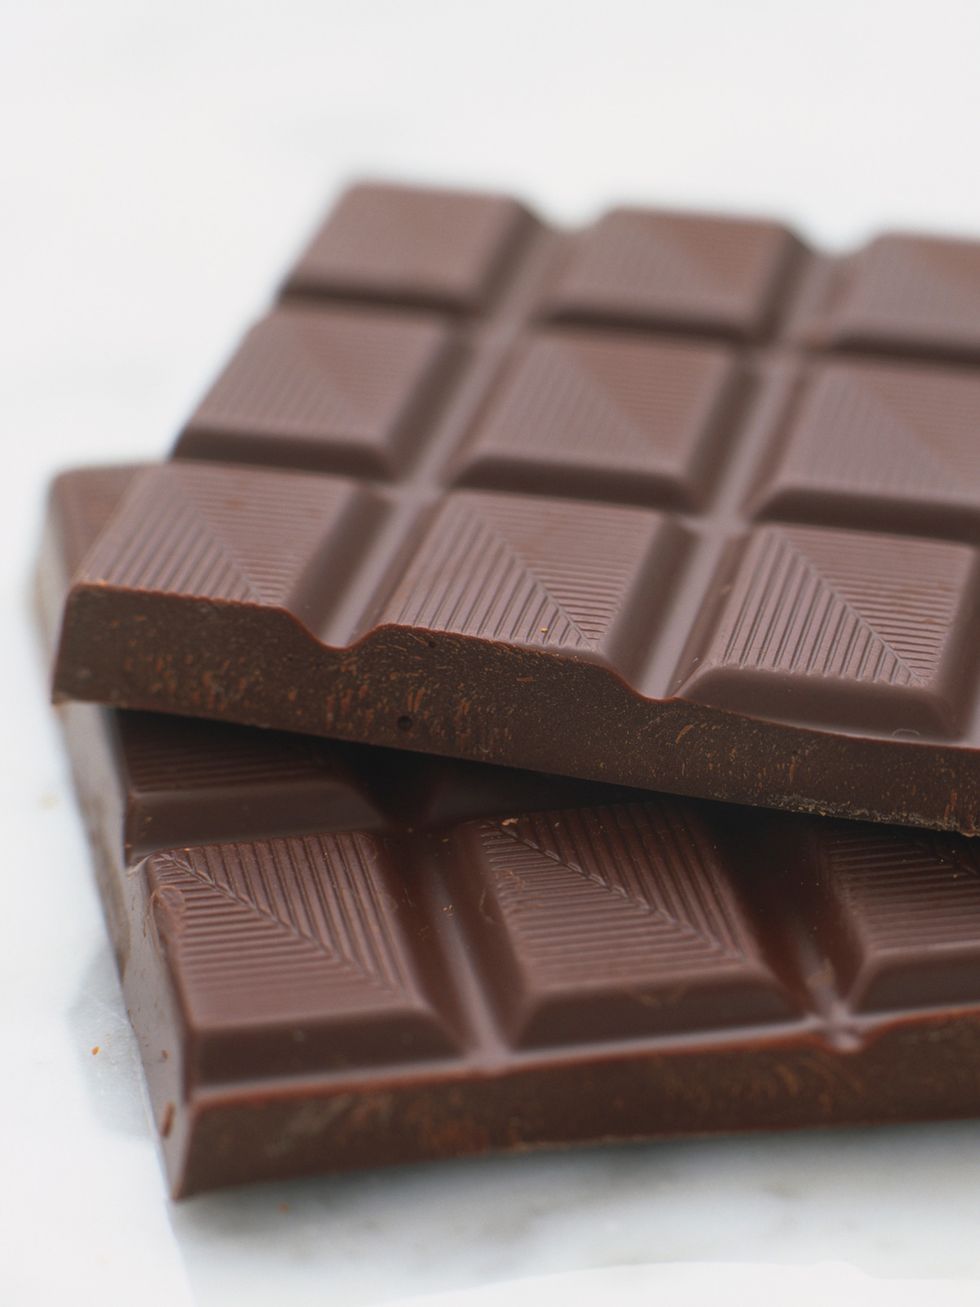 Chocolate bar, Chocolate, Food, Confectionery, Dessert, Fudge, Cocoa solids, Toffee, Baked goods, Cuisine, 